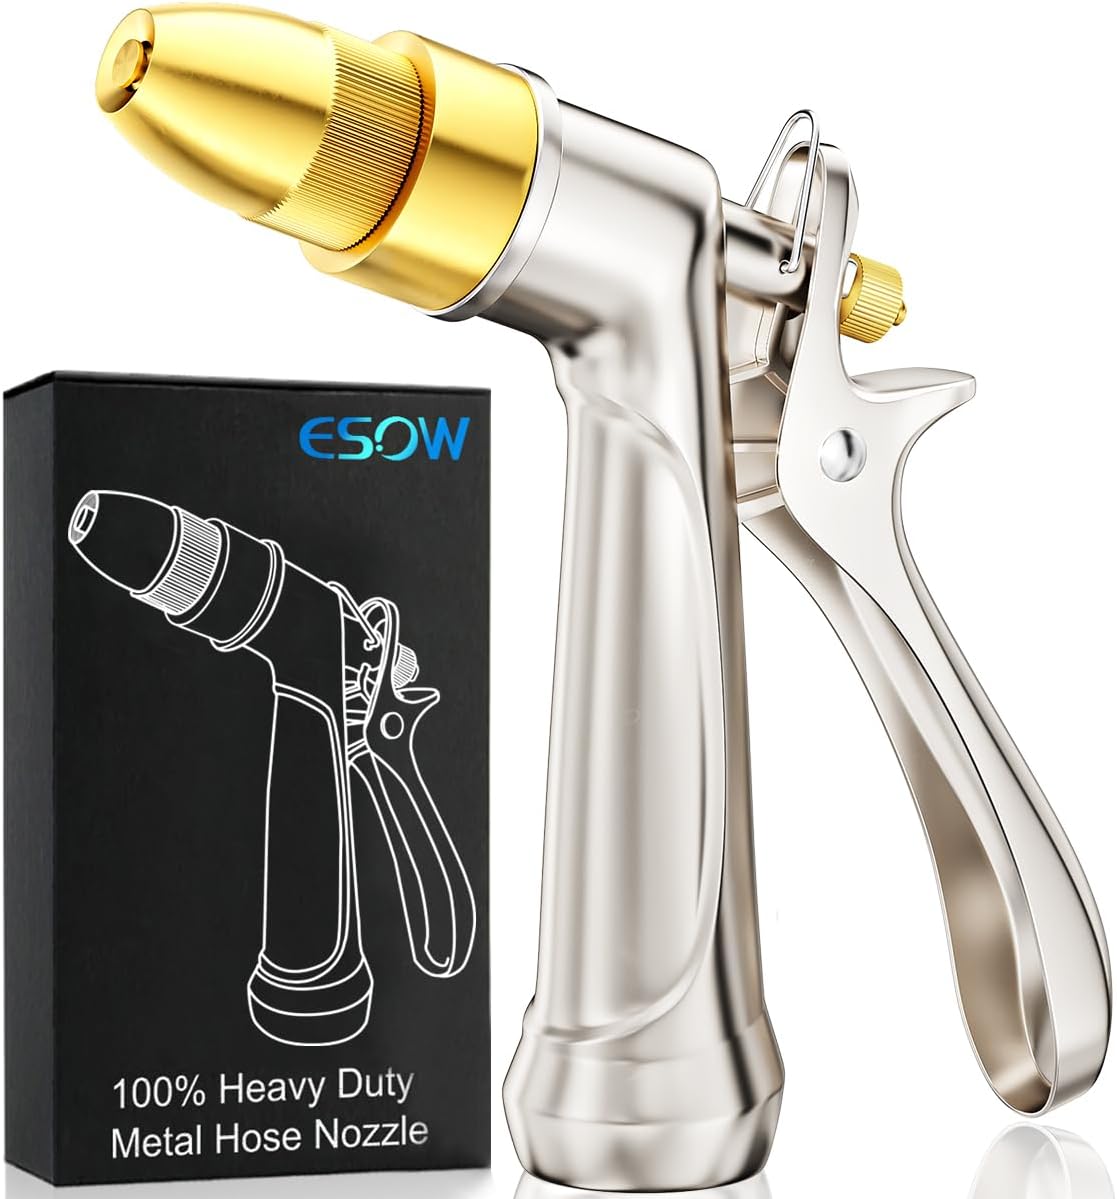 ESOW Garden Hose Nozzle, 100% Heavy Duty Metal Spray Gun with Full Brass Nozzle, 4 Watering Patterns Watering Nozzle- High Pressure Rear Trigger Design for Watering Plants, Car Wash and Showering Dog